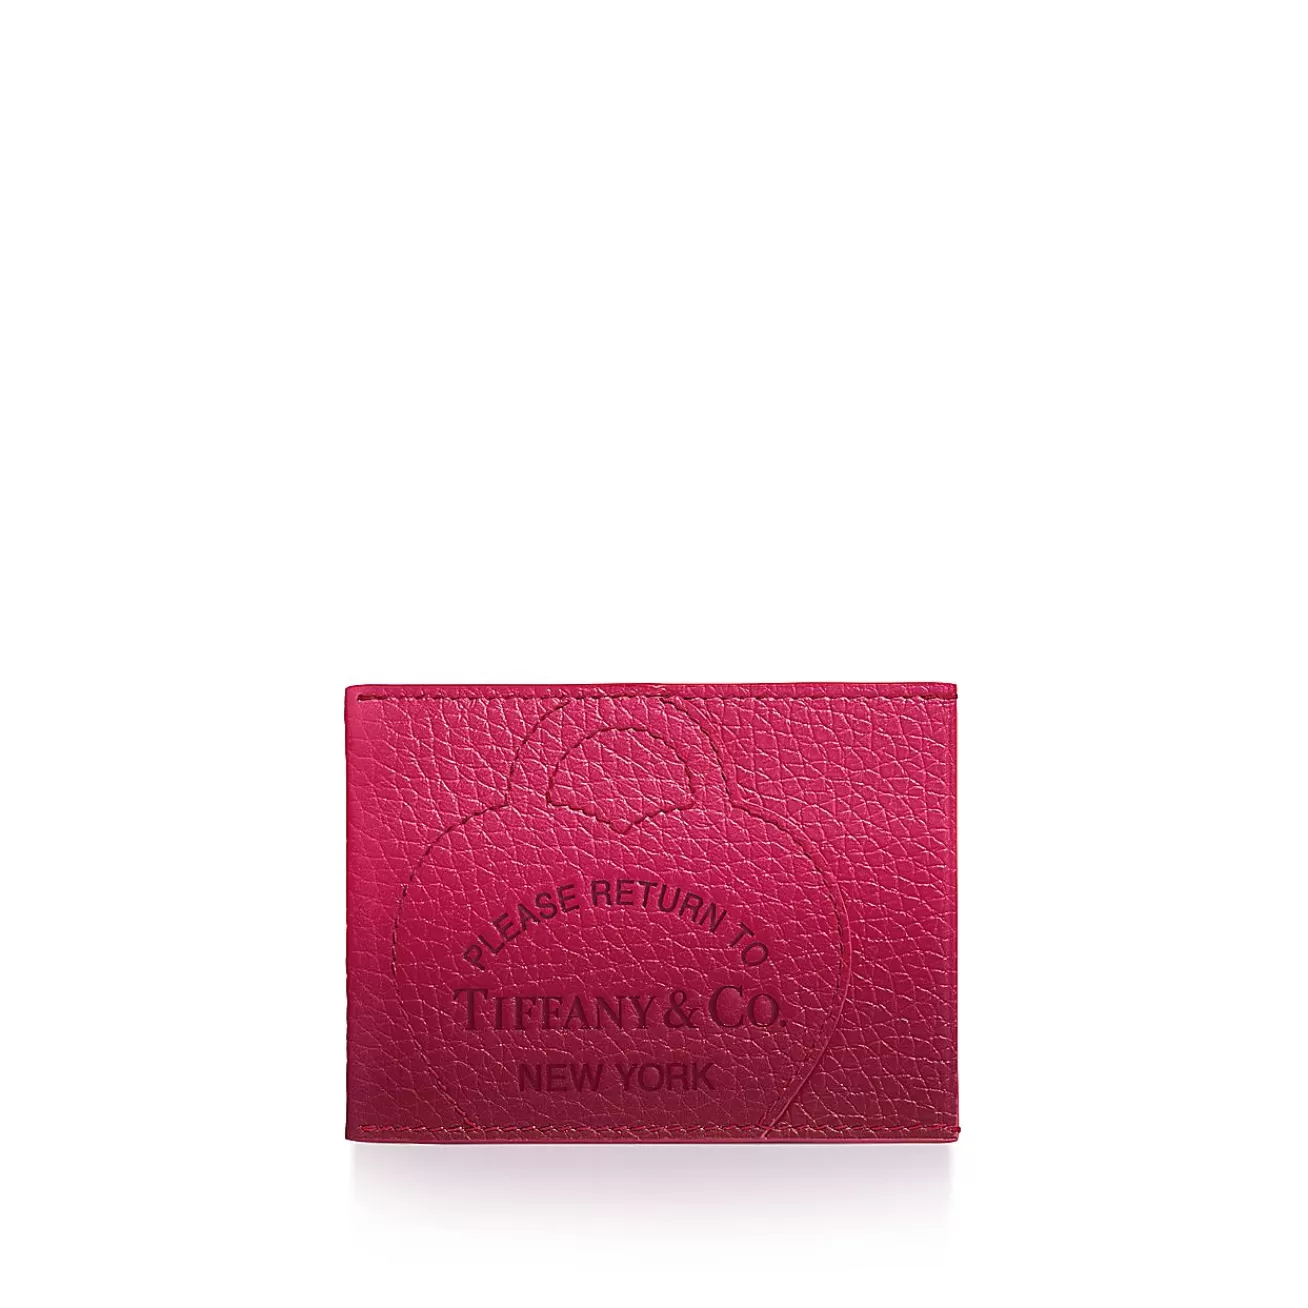 Tiffany & Co. Return to Tiffany® Card Case in Infinity Ruby Leather | ^Women Small Leather Goods | Women's Accessories